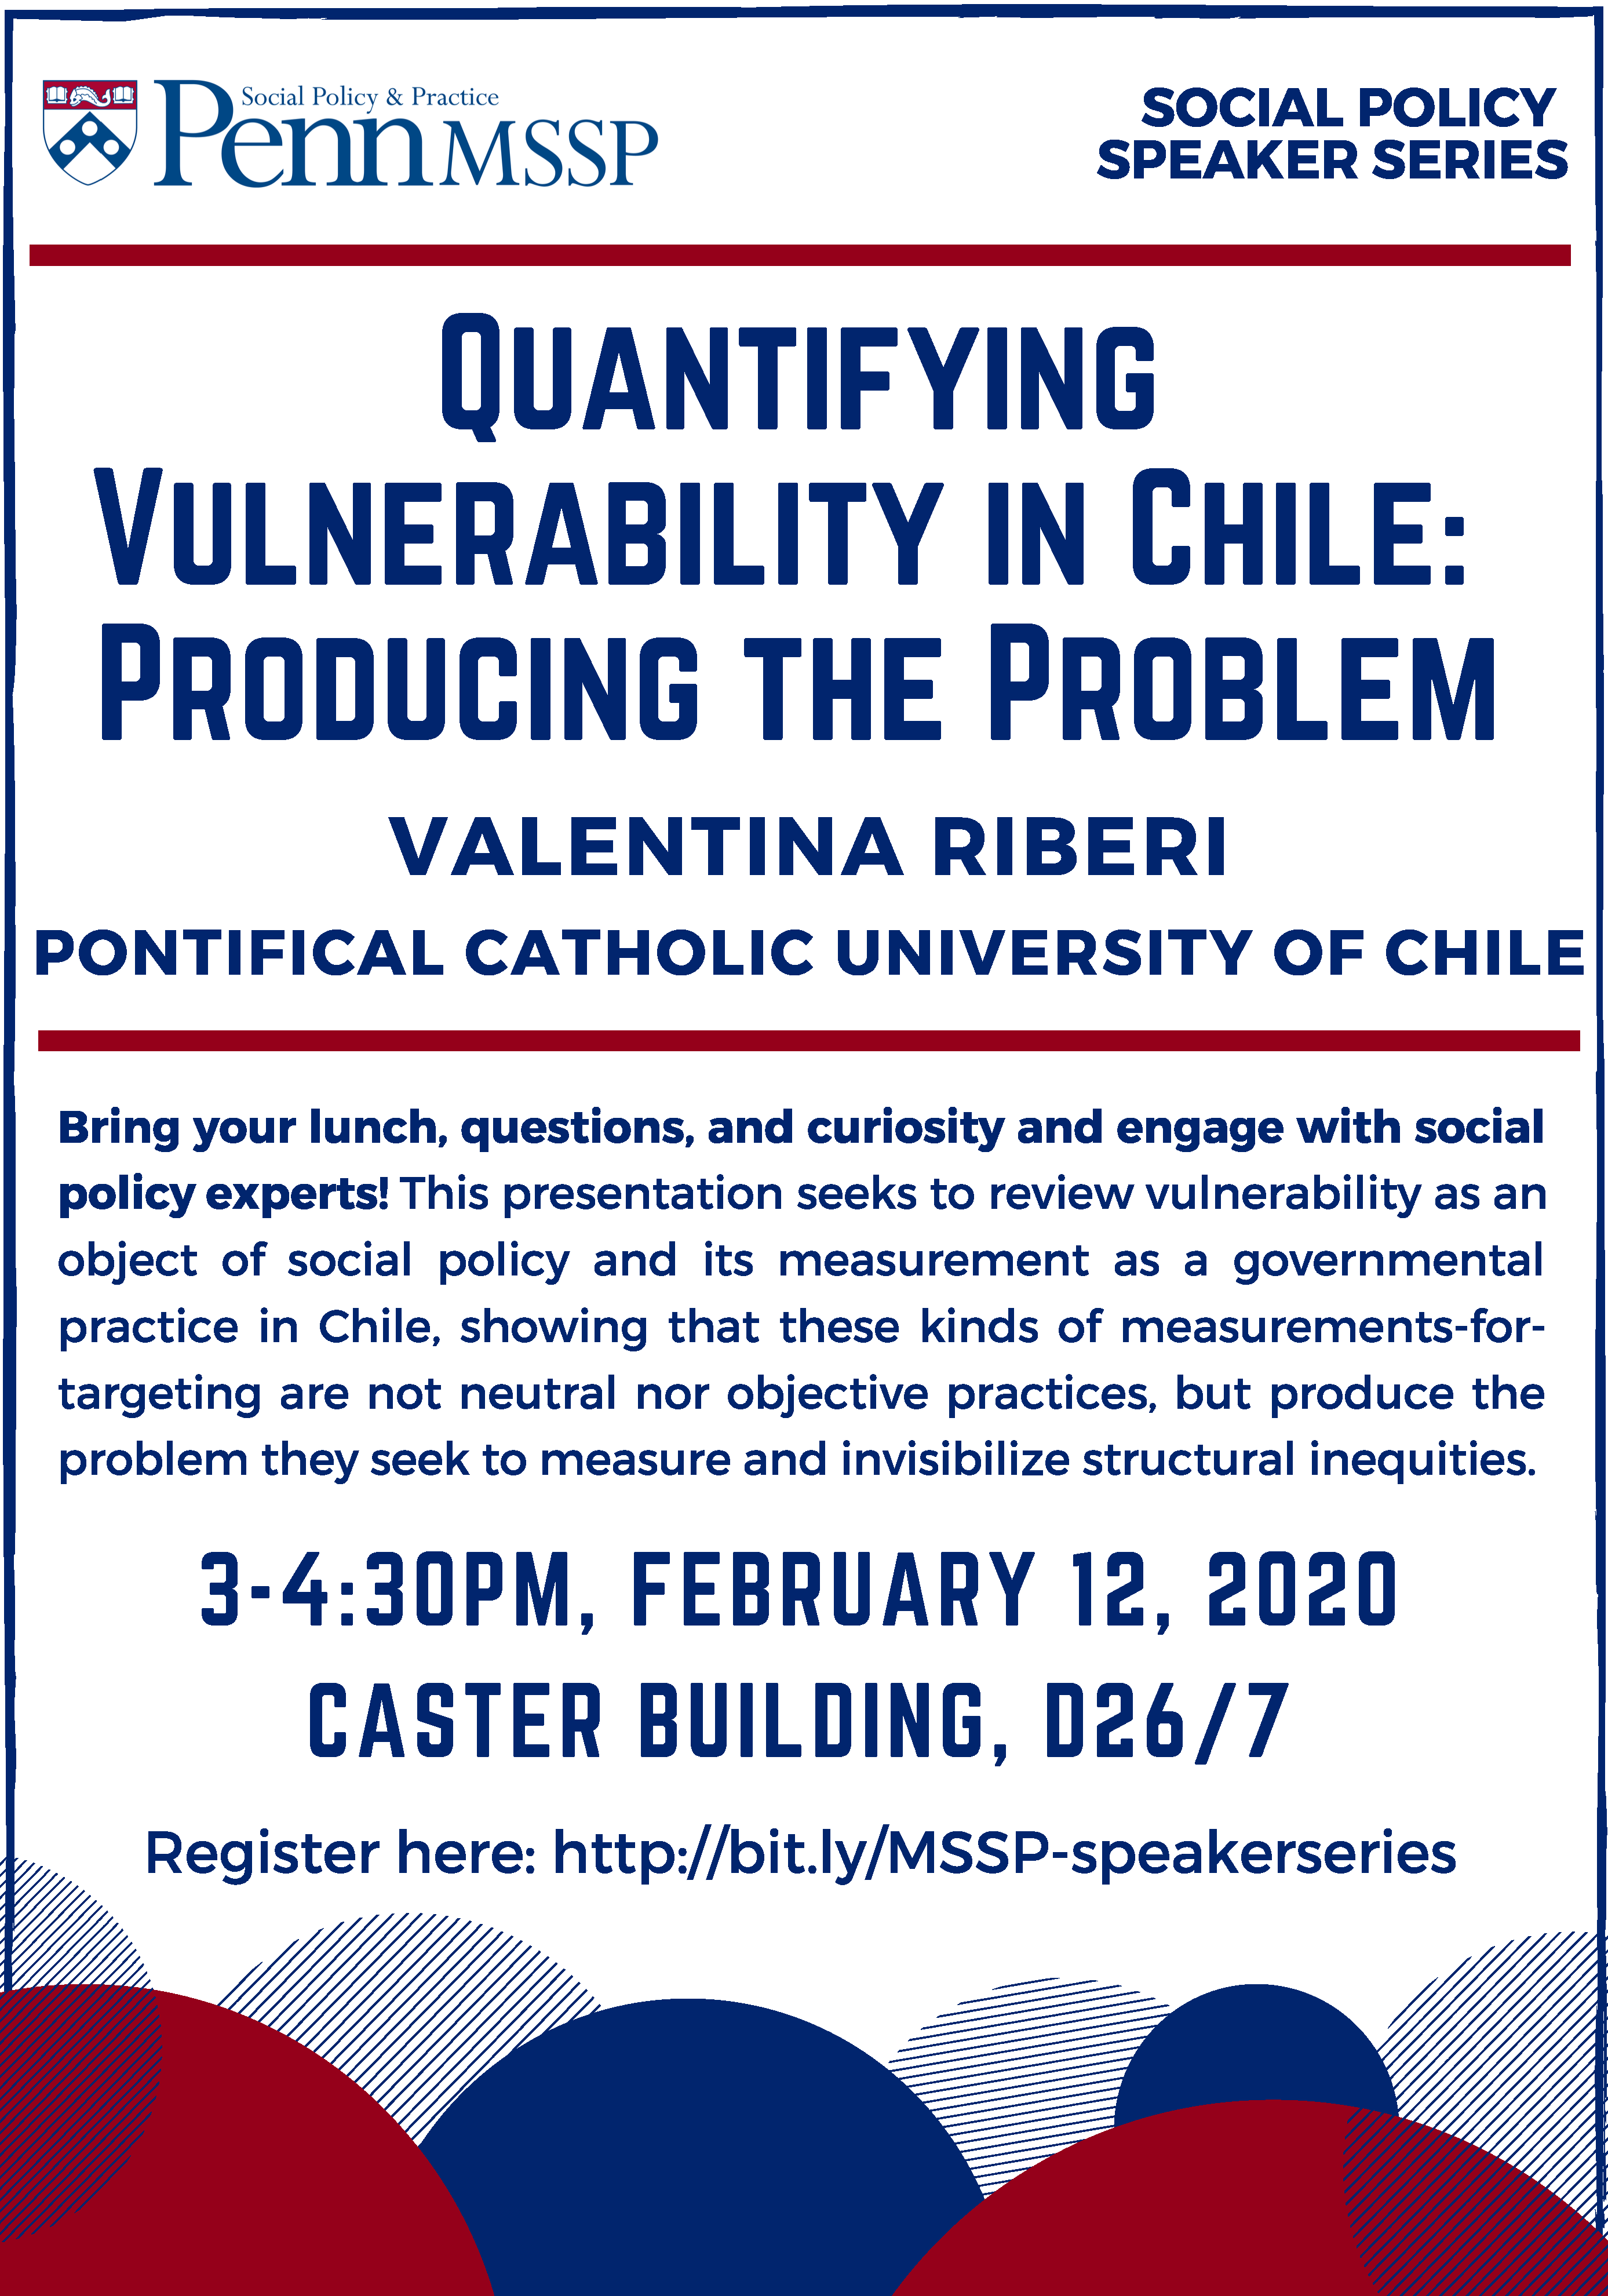 Poster for Quantifying Vulnerability in Chile: Producing the Problem